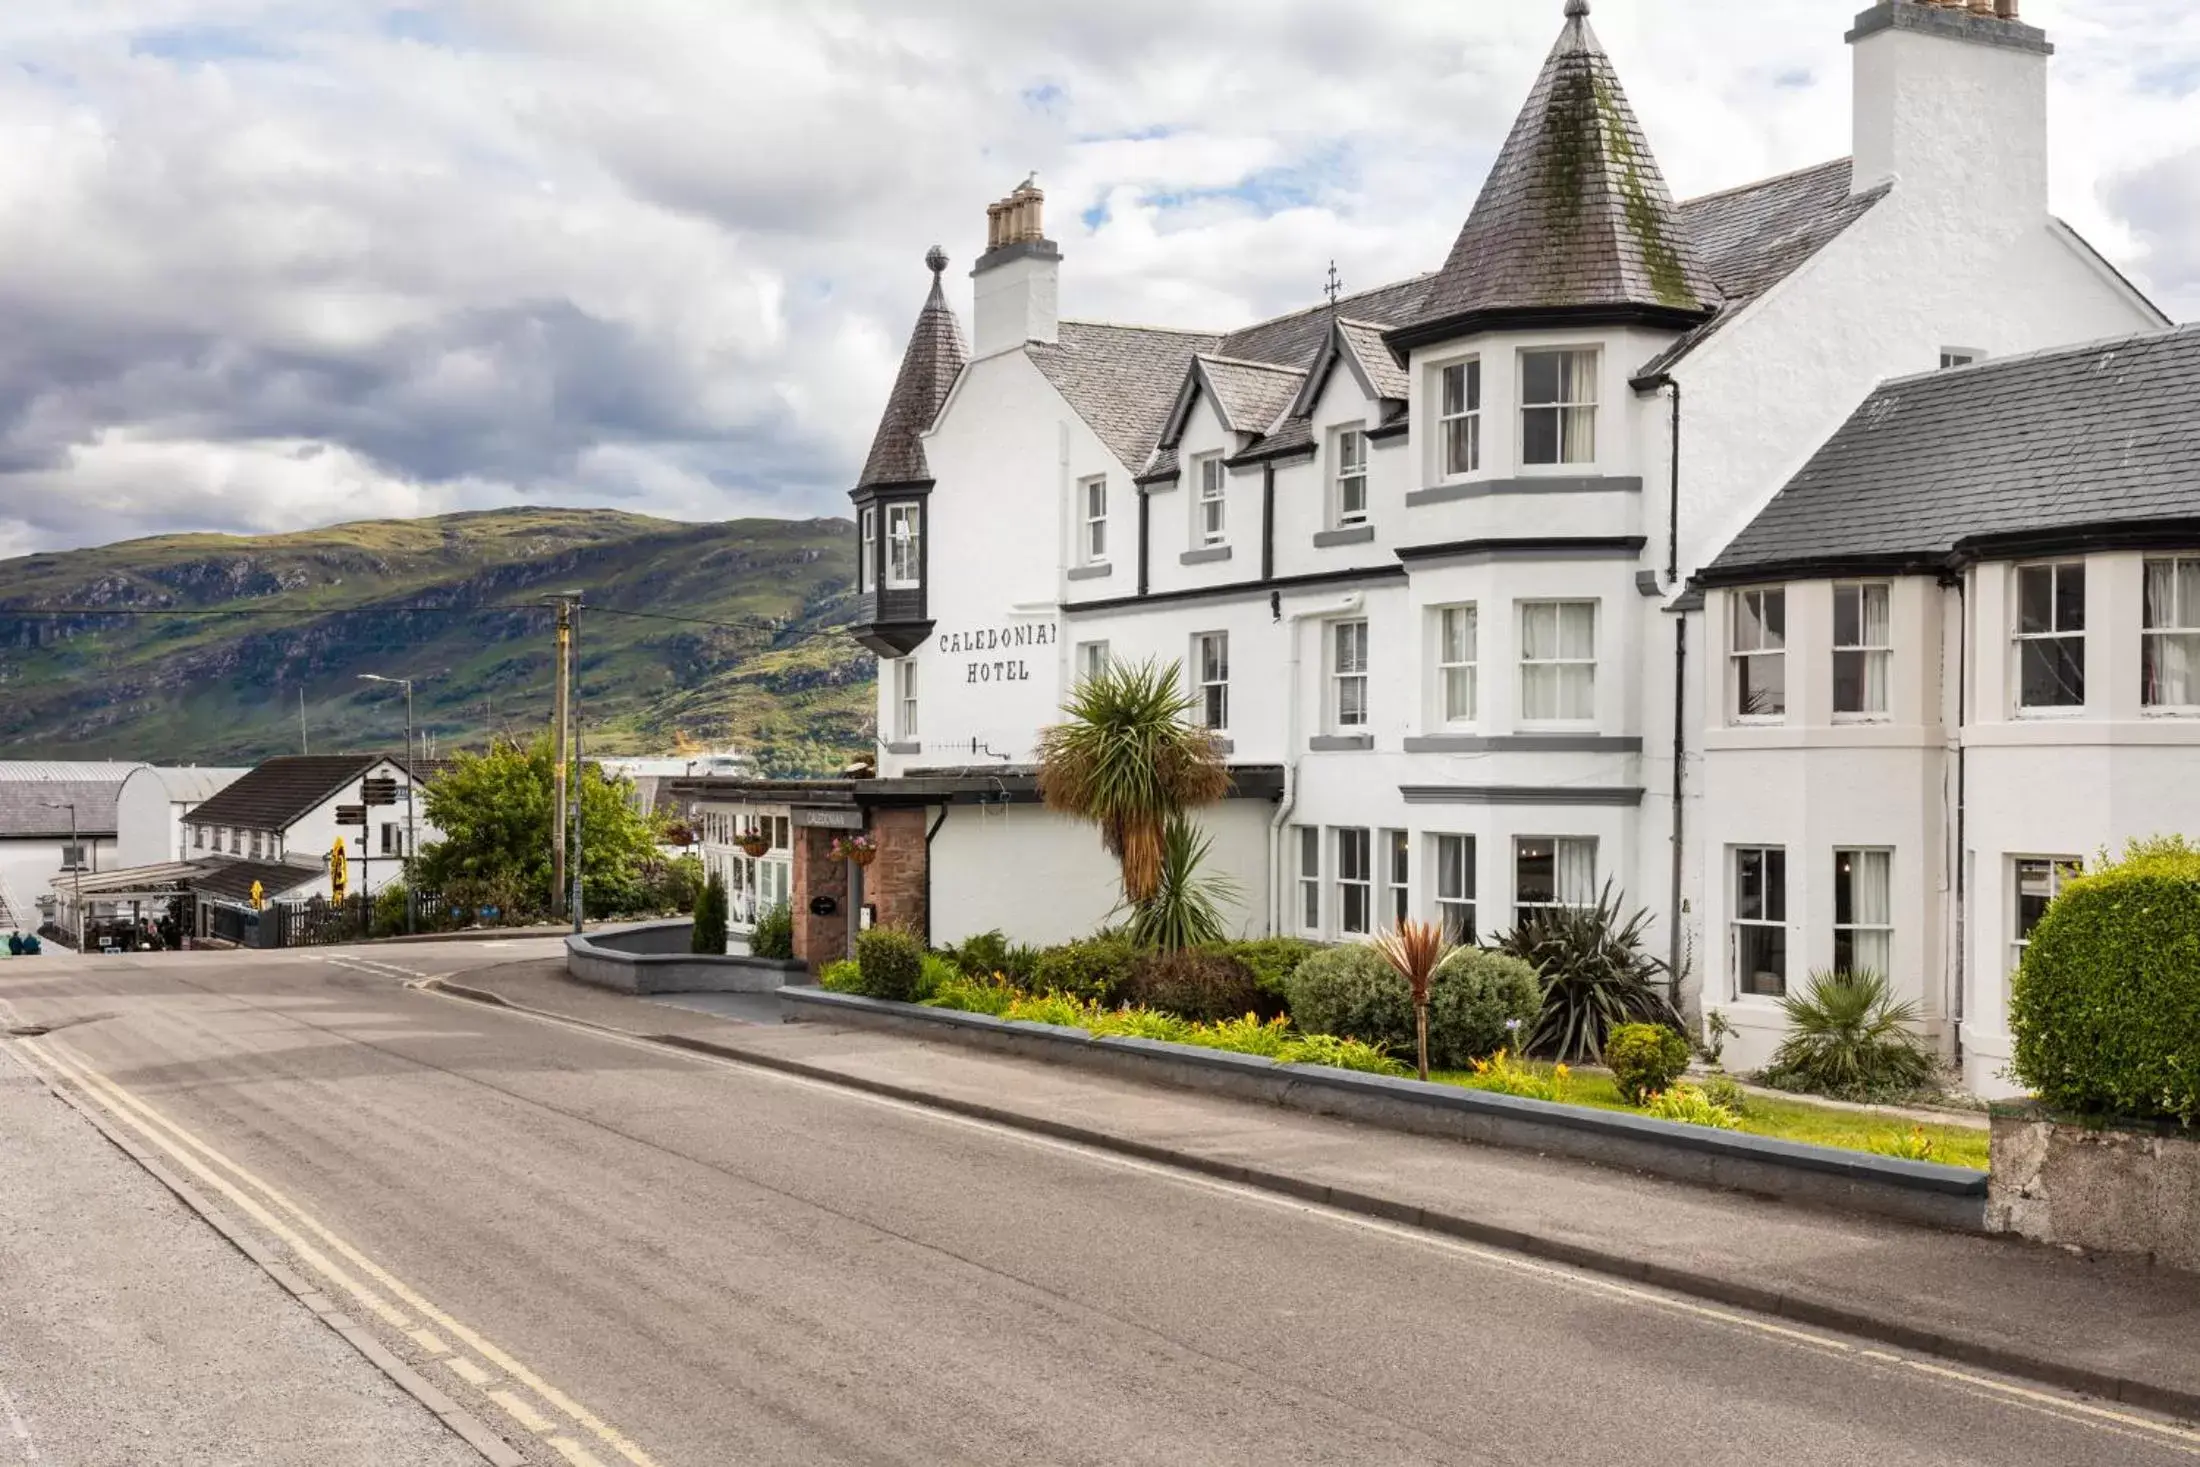 Property building in Caledonian Hotel 'A Bespoke Hotel’